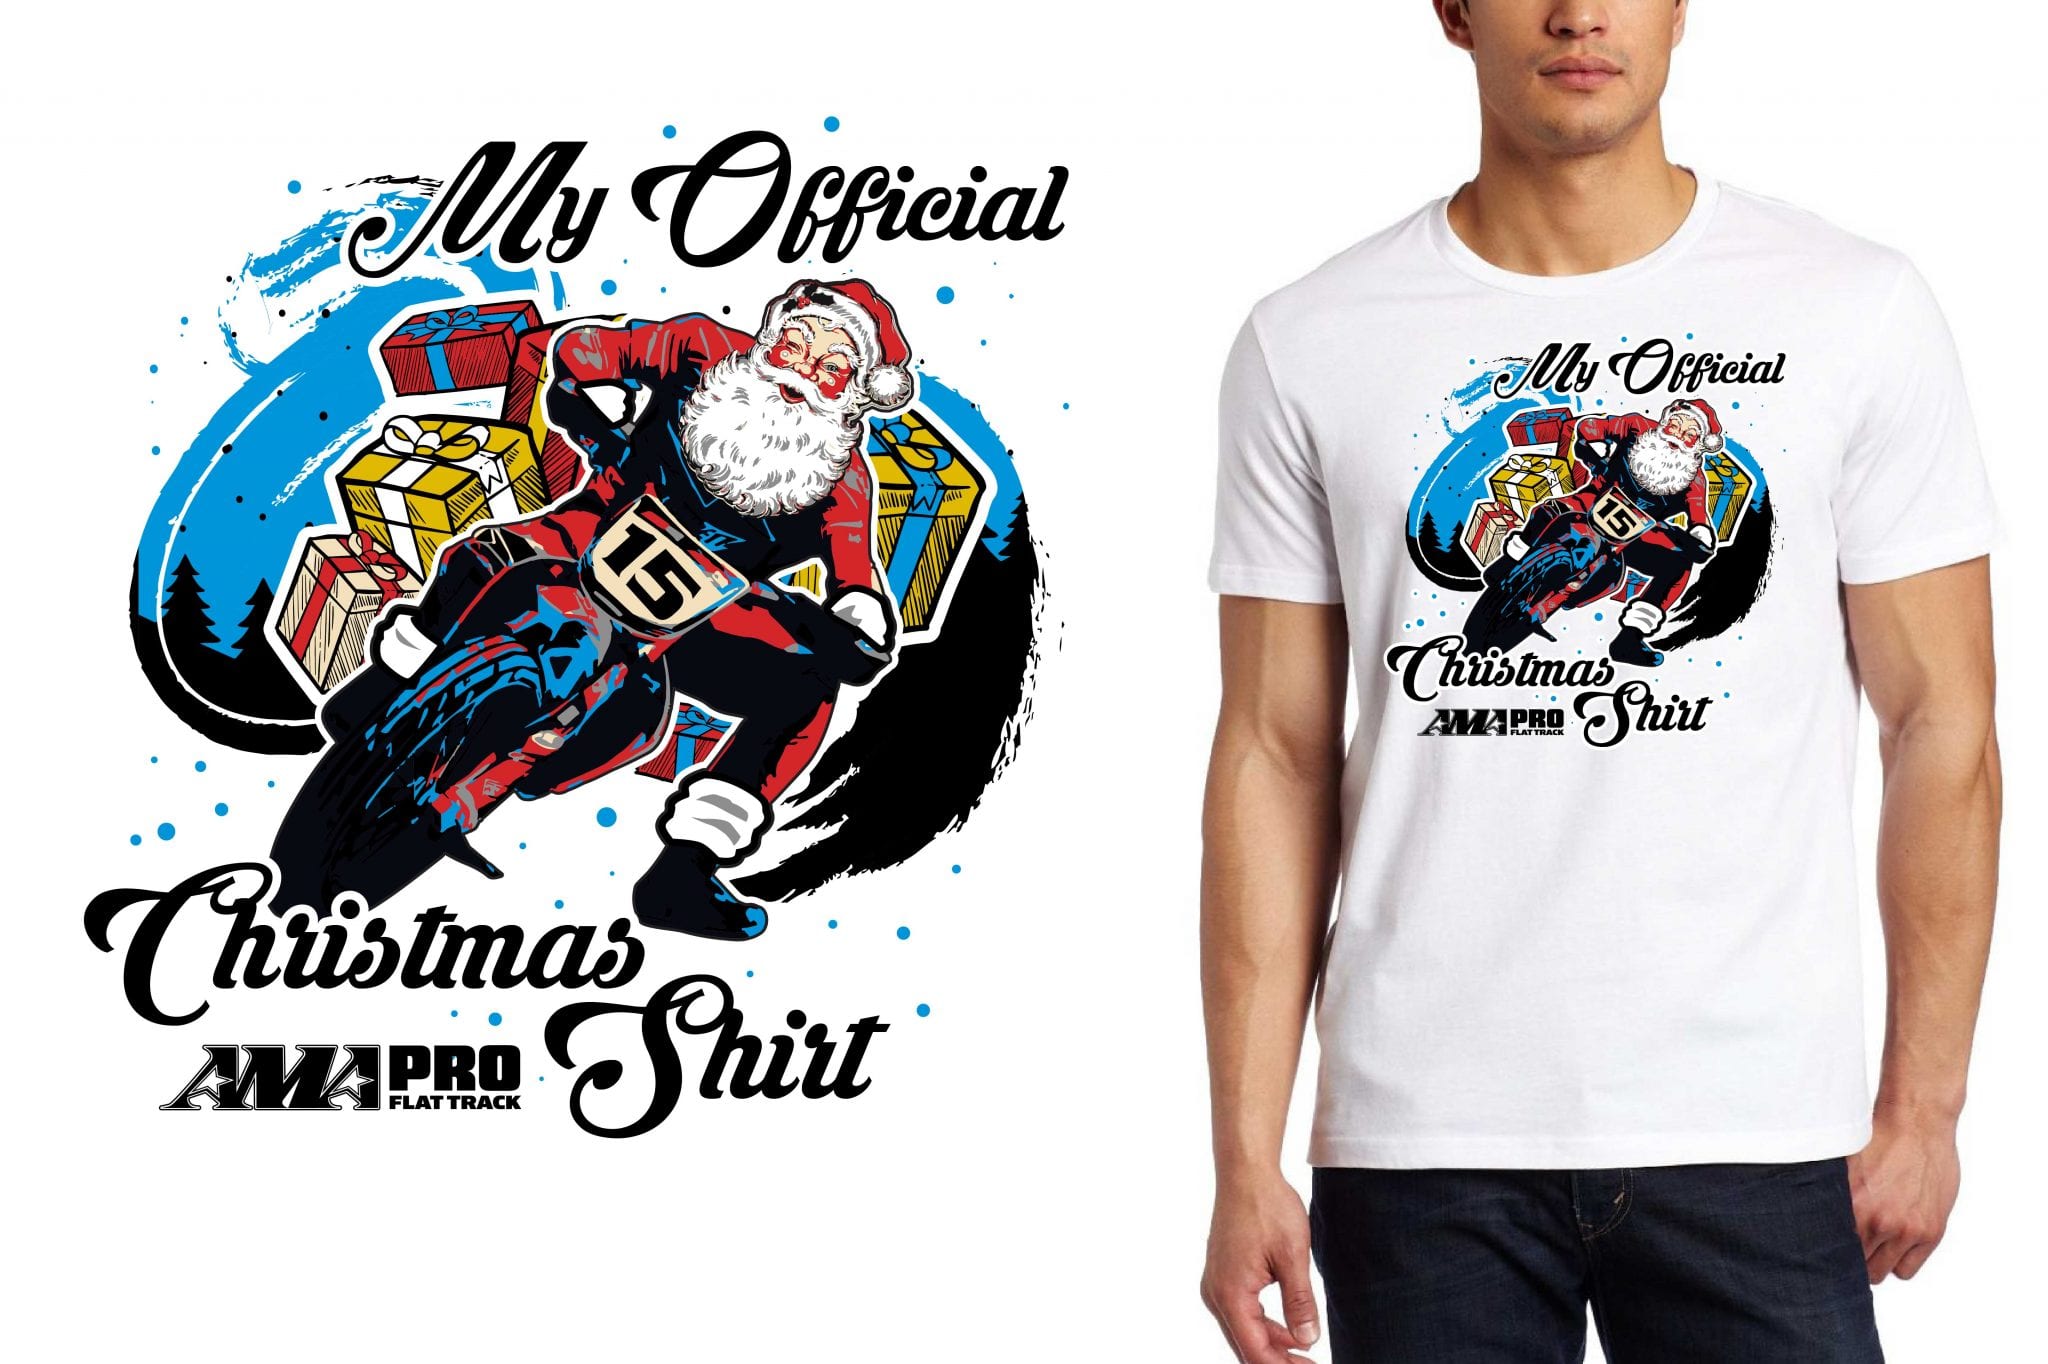 My Official Christmas Shirt for AMA PRO FLAT TRACK TSHIRT DESIGN